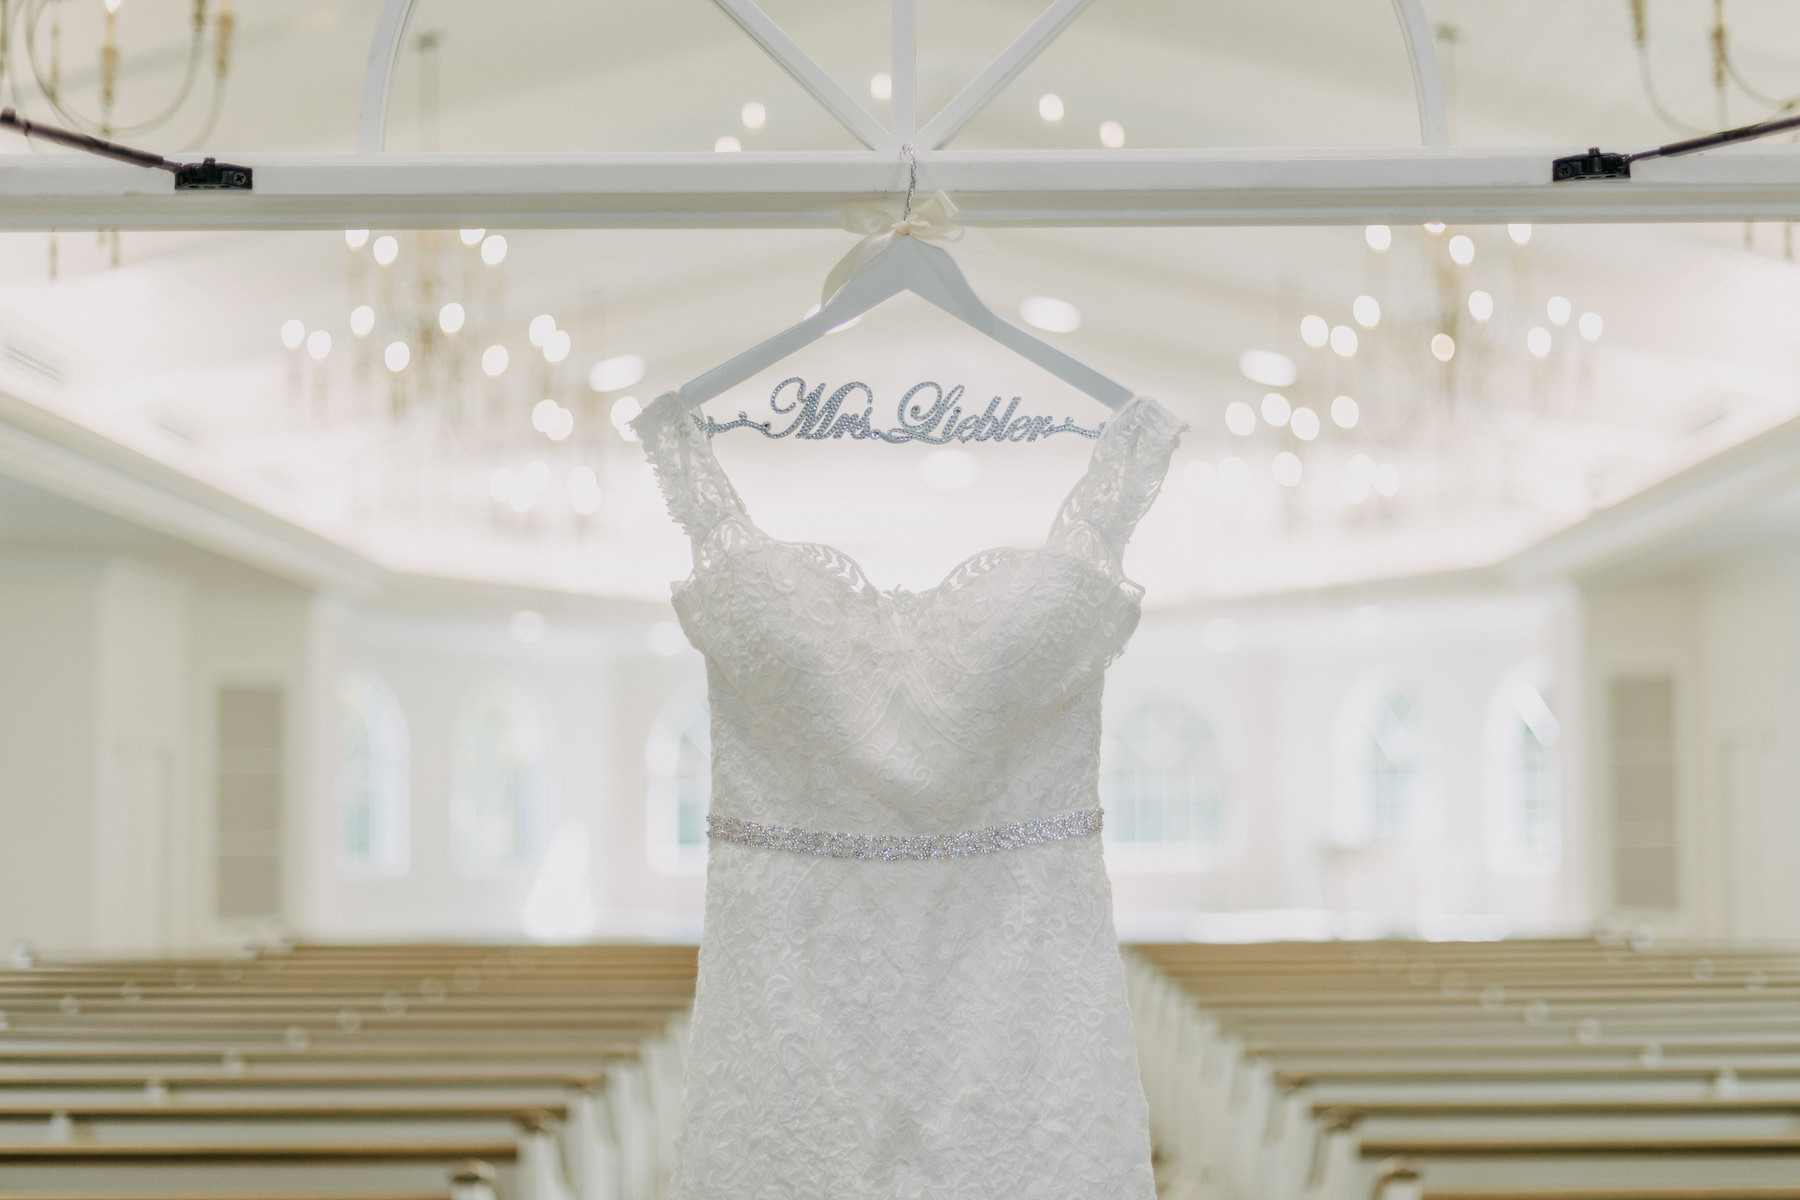 Classic Lace Sweetheart Neckline with Lace Straps Classic Ashley & Justin Wedding Dress with Rhinestone Belt on Personalized Hanger | Harborside Chapel